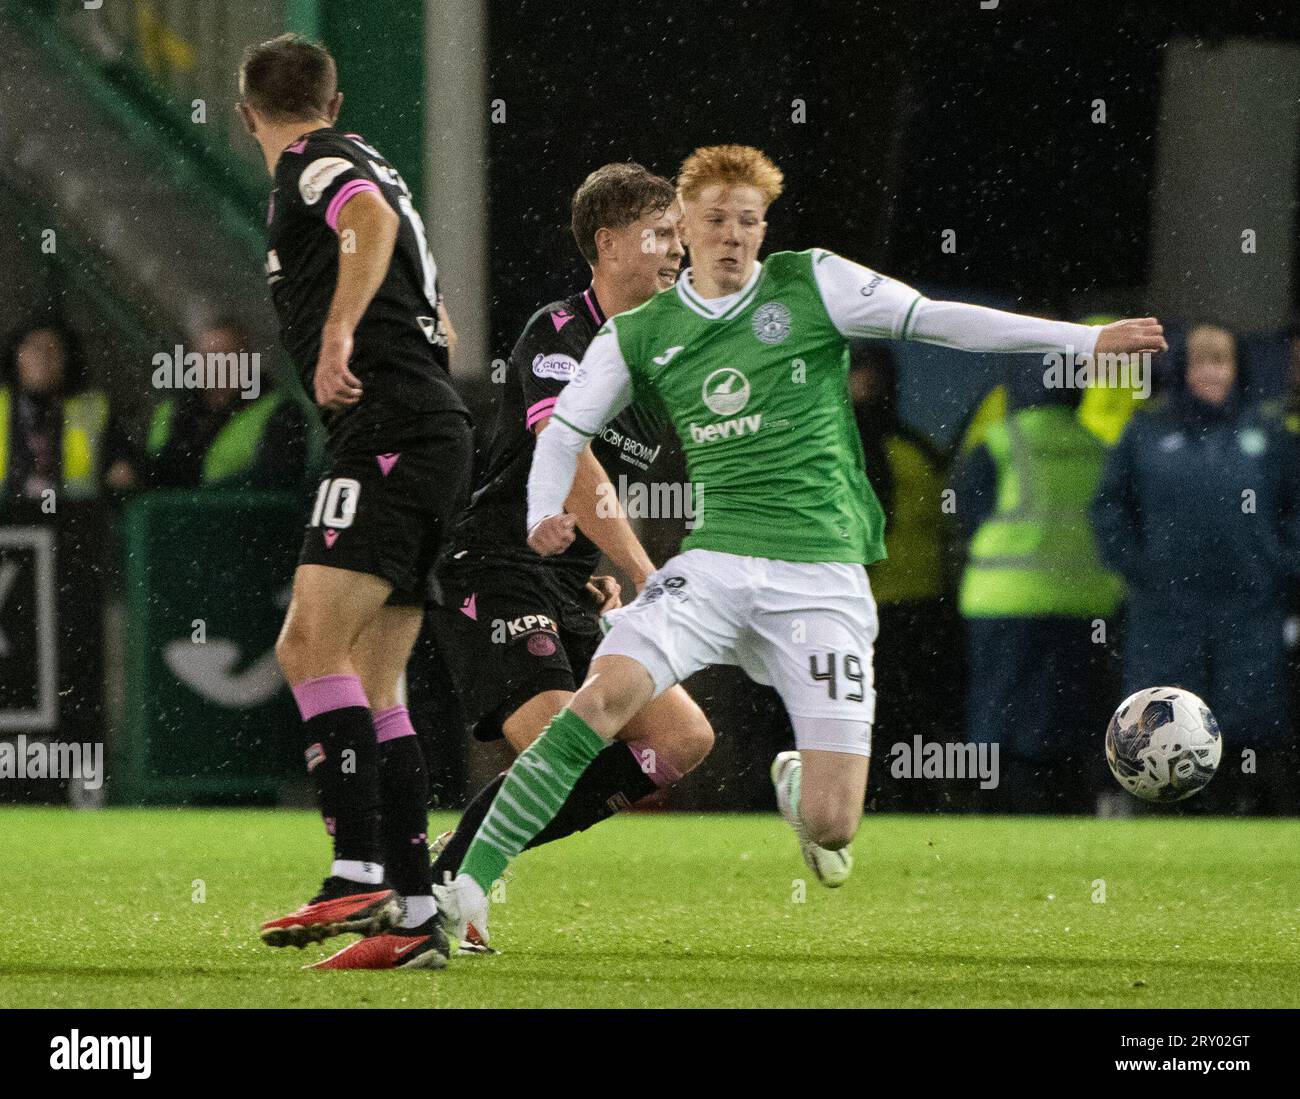 Scottish League Cup quarter final - Hibernian FC v St Mirren FC 27/09/2023 Hibs’ youngest ever player, Rory Whittaker, as Hibs take on St Mirren in the Scottish League Cup quarter final at Easter Road Stadium, Edinburgh, UK Credit: Ian Jacobs Stock Photo